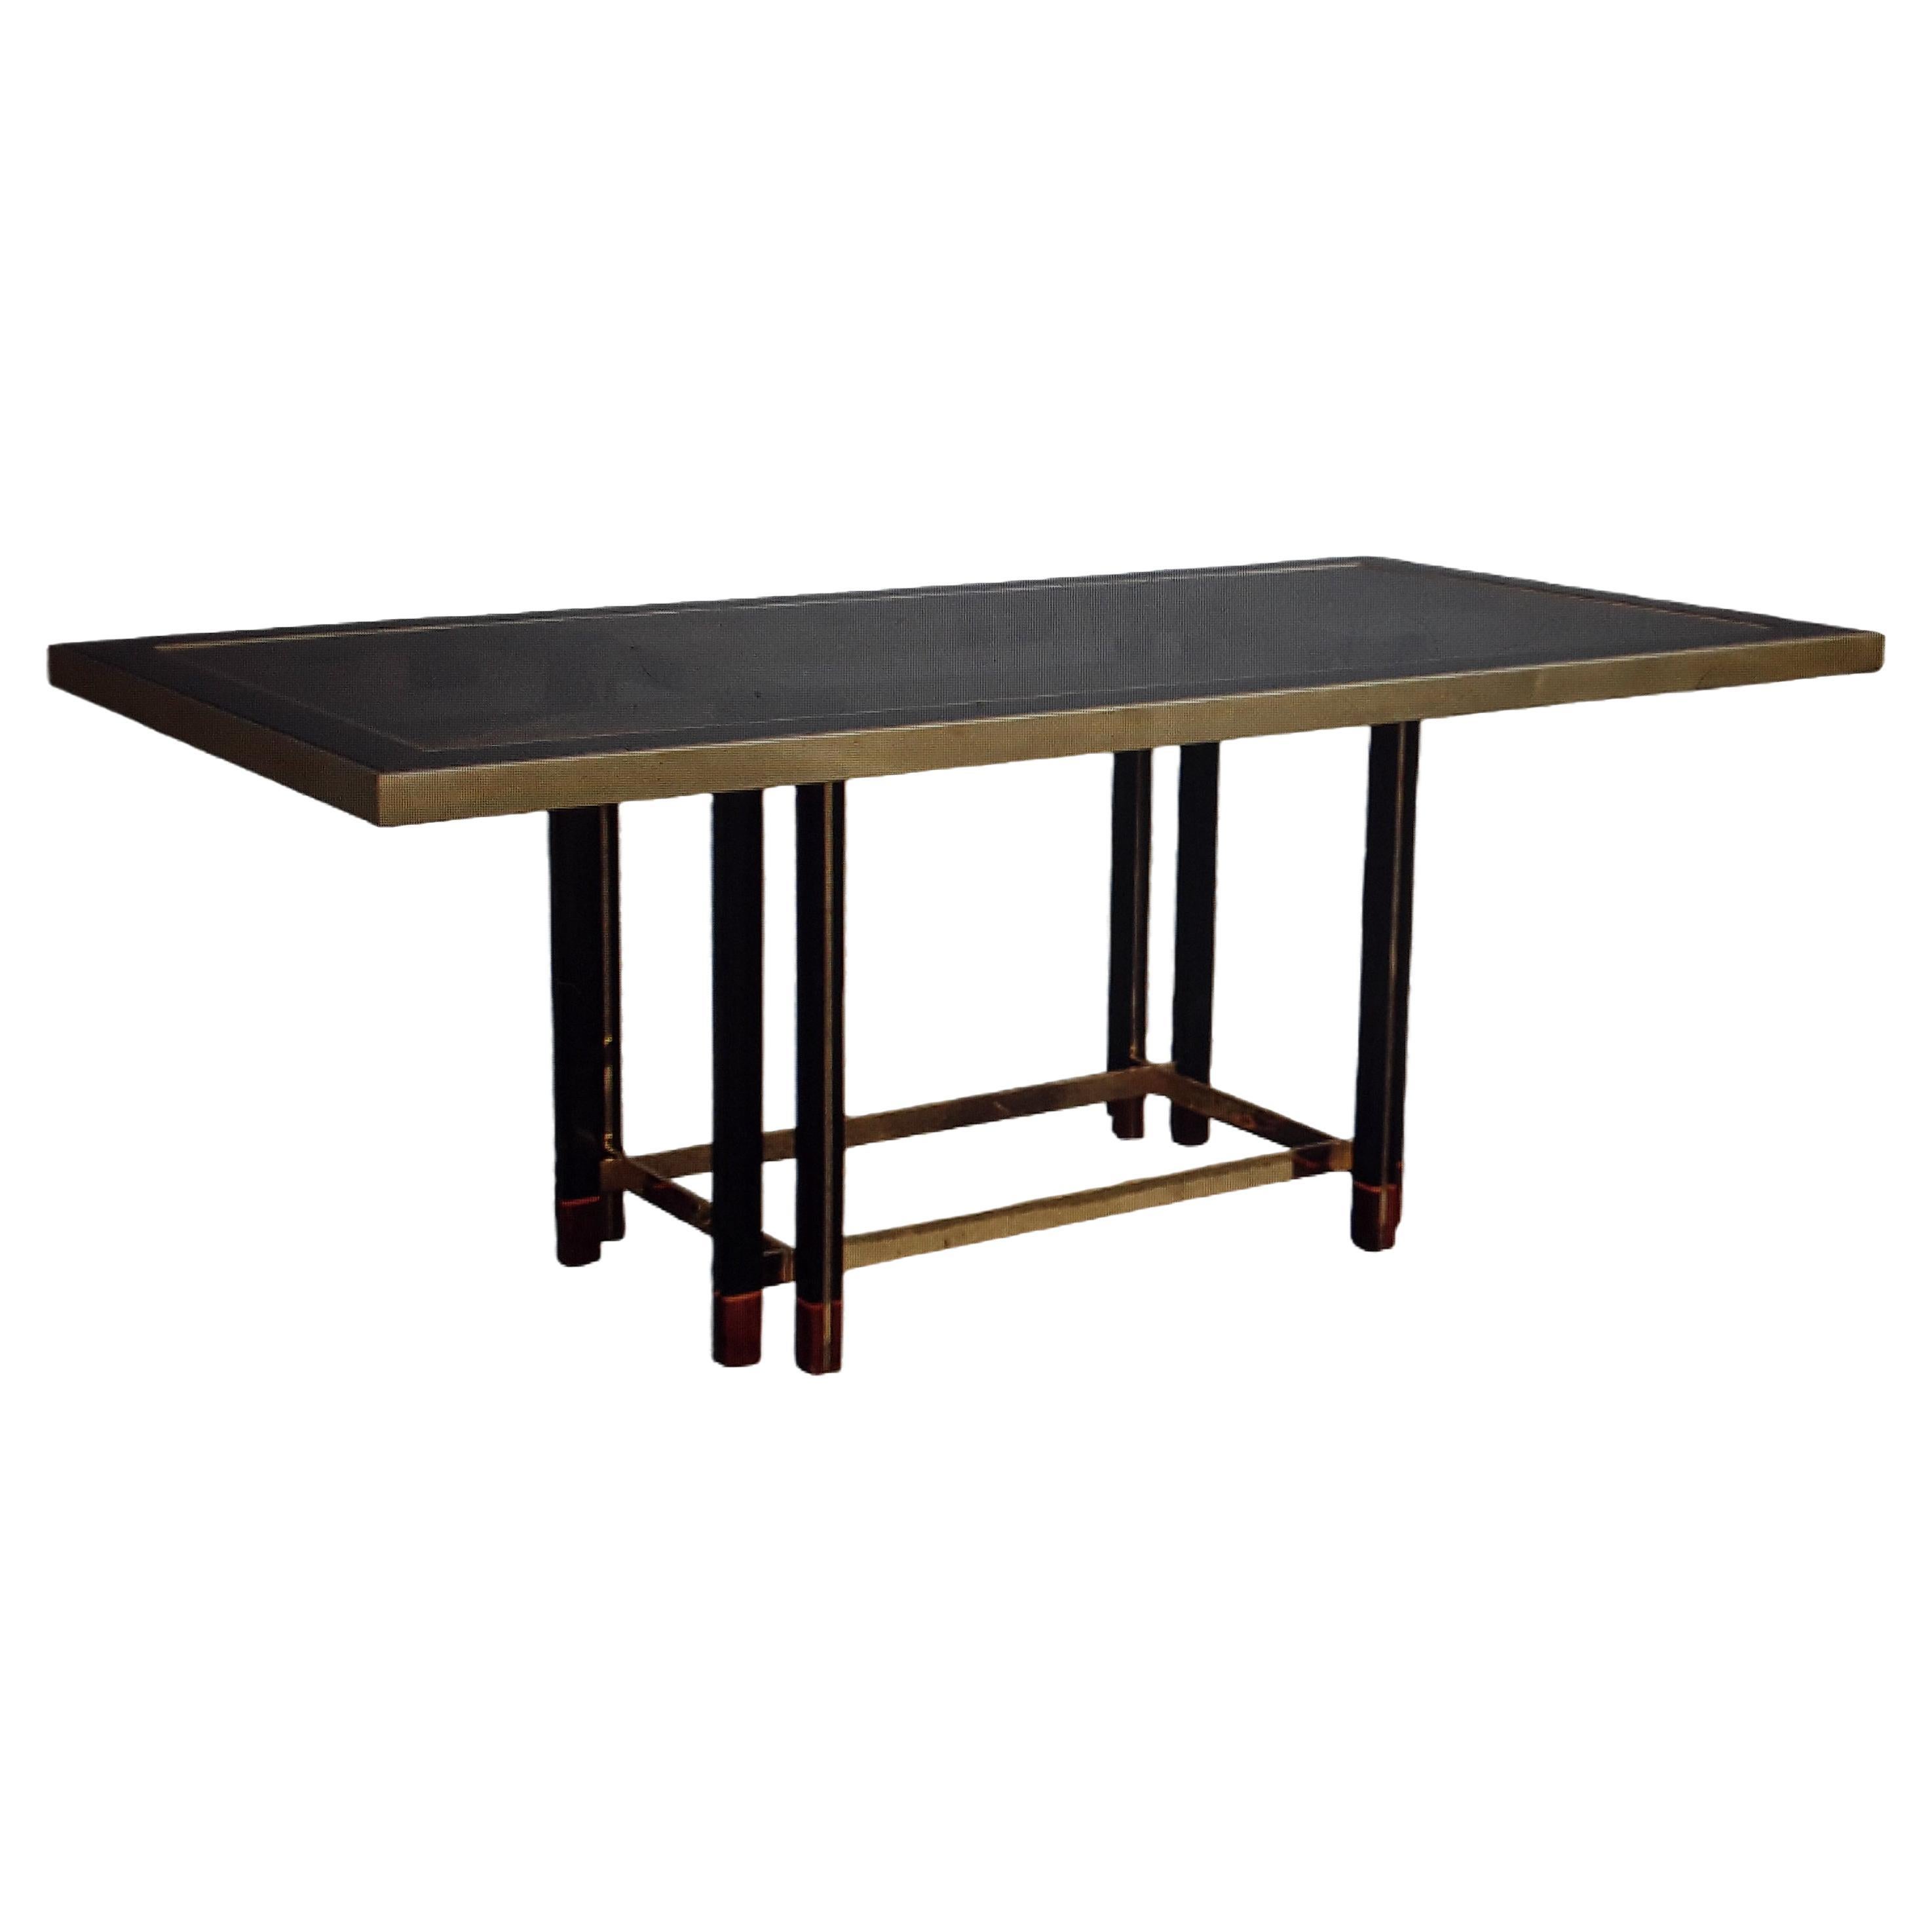 1950's MCM Brass/ Macassar Ebony/ Bronze Toned Glass Dining Table by Roman Spa For Sale